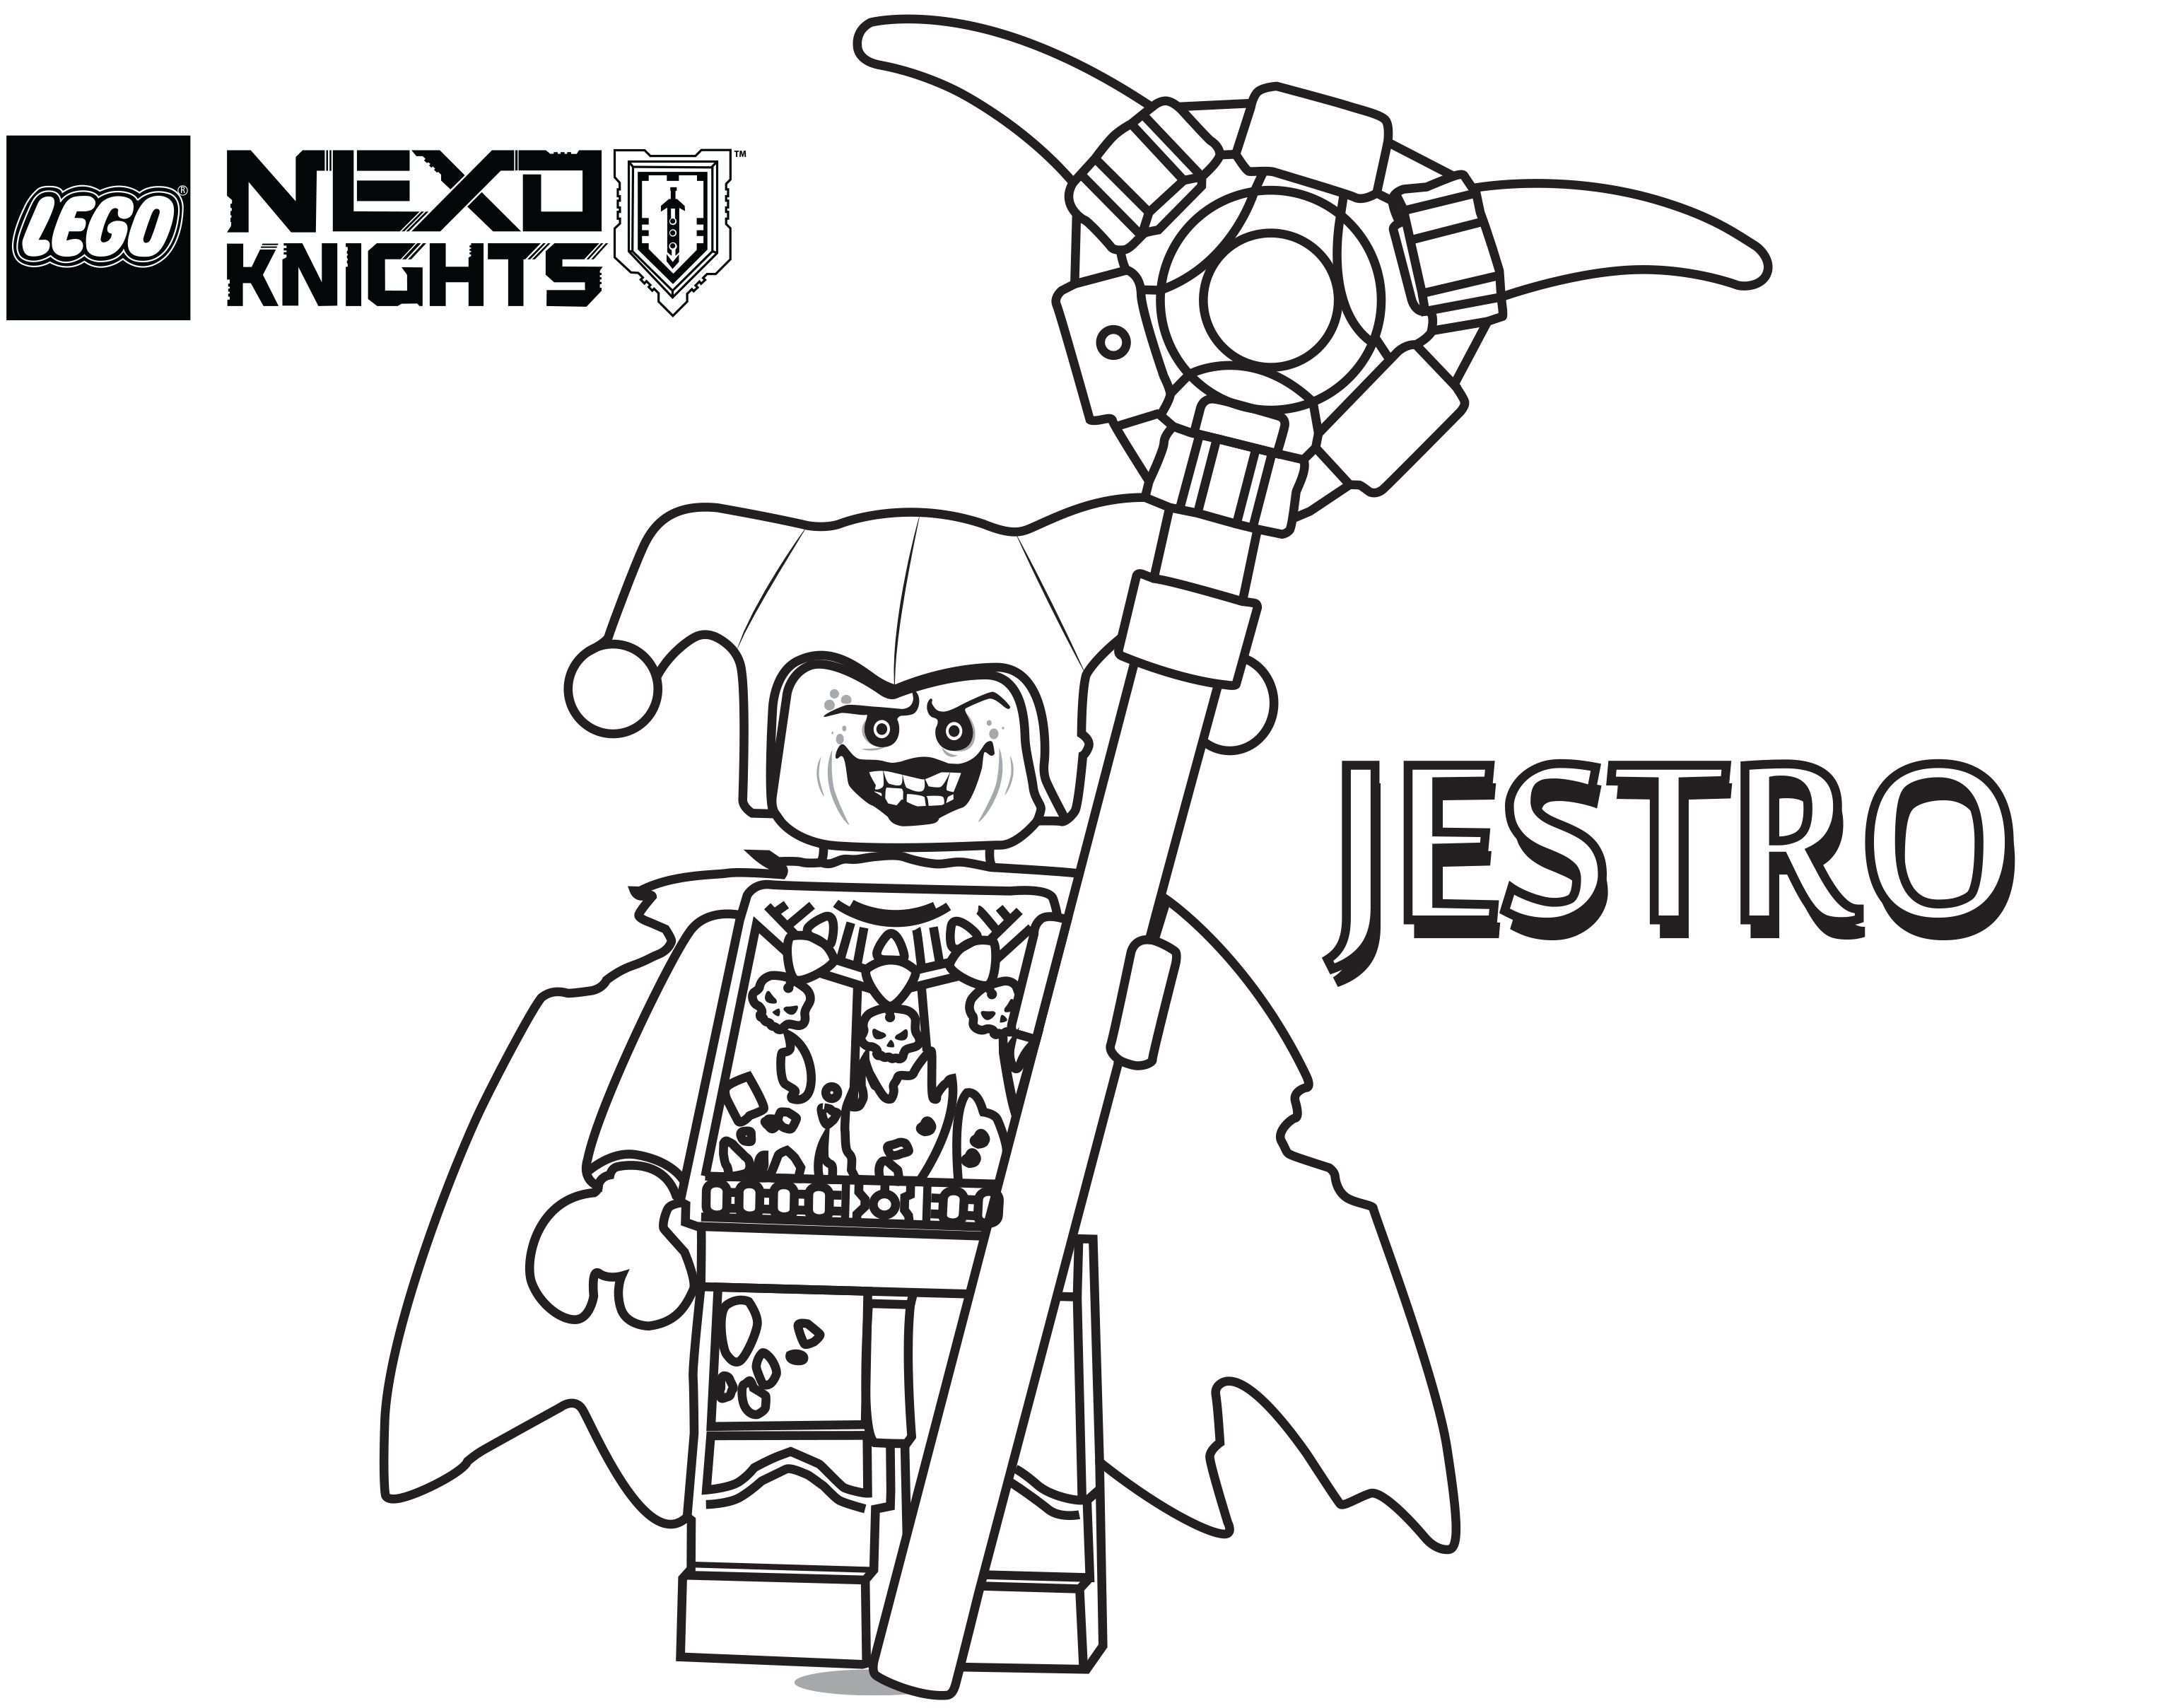 Lego Nexo Knights Coloring Pages Lego Coloring Pages Lego Coloring Coloring Pages